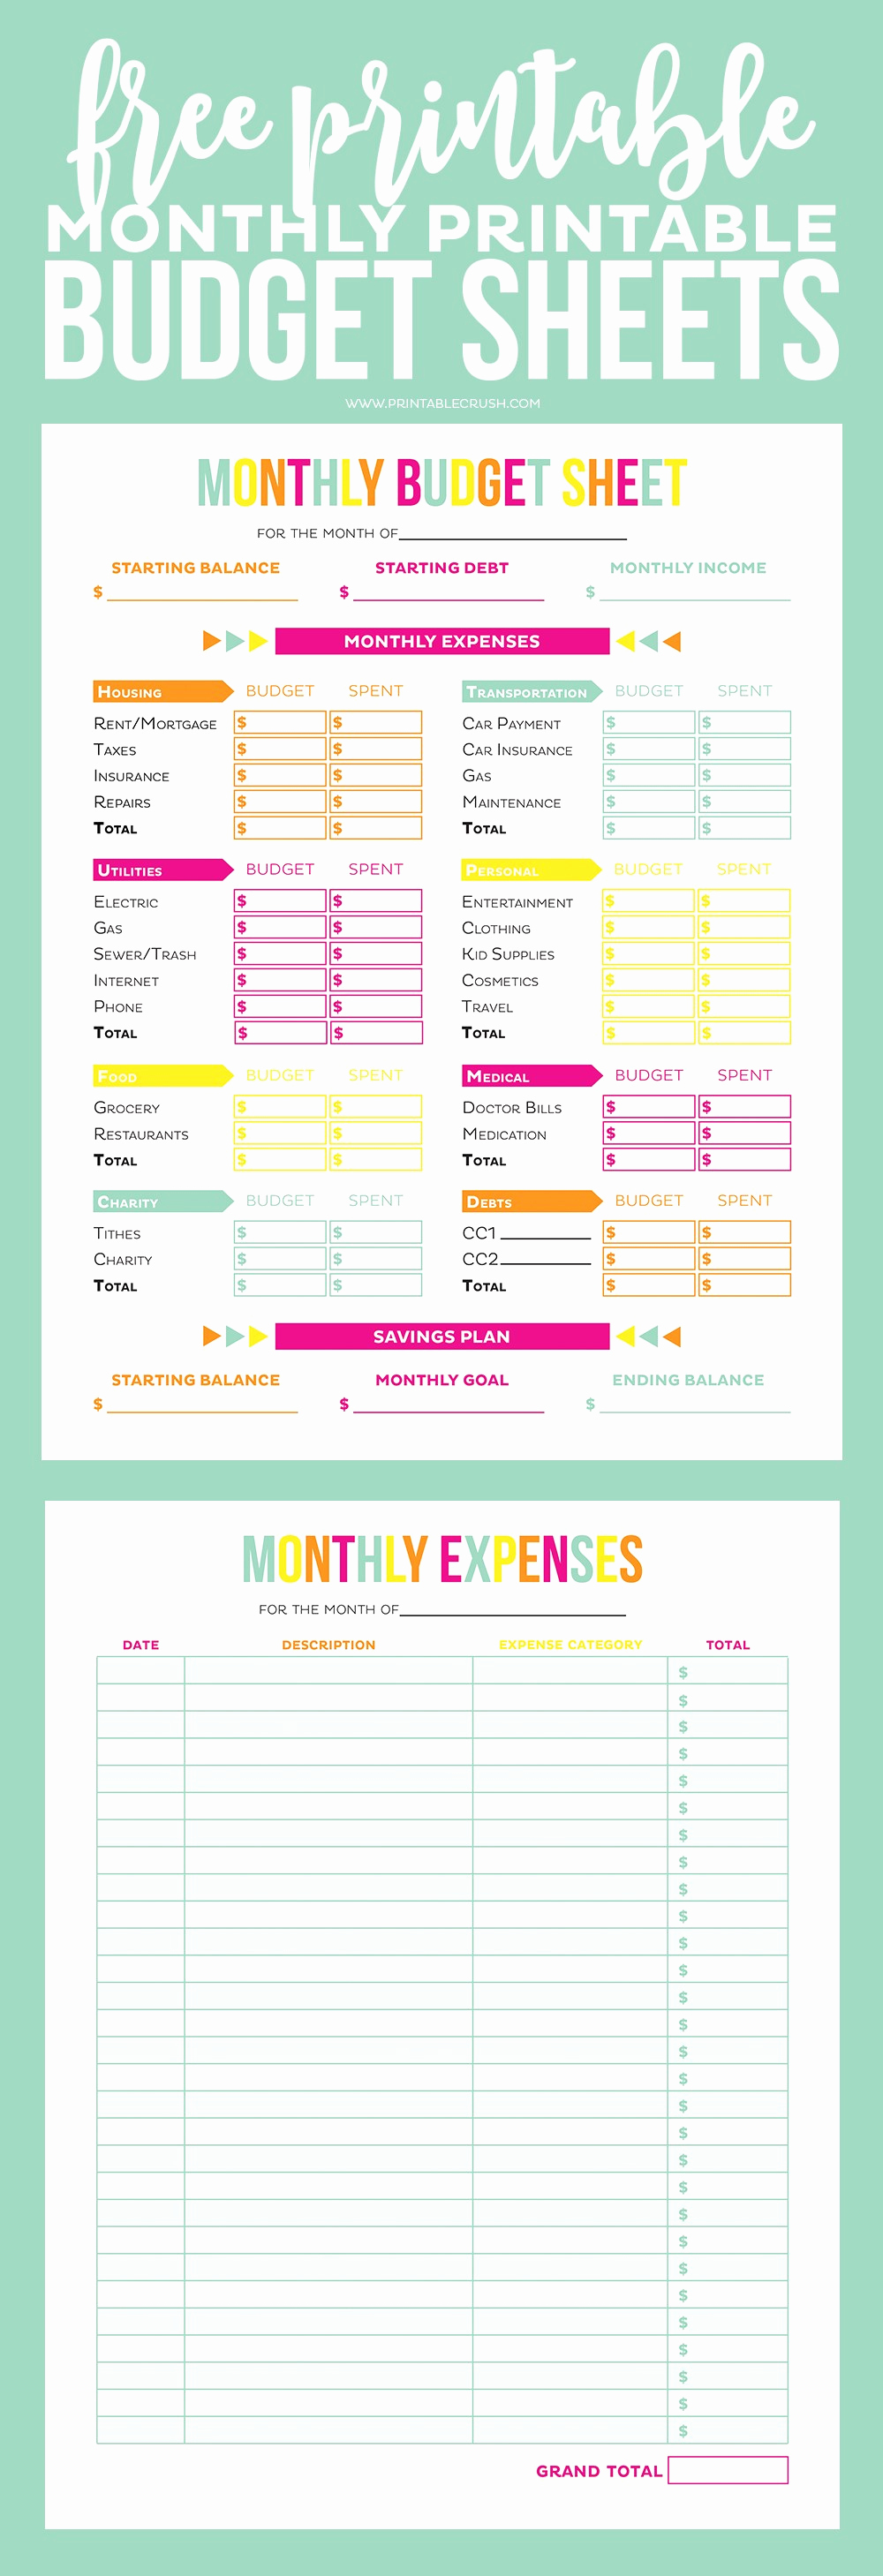 Monthly Budget Worksheet Printable Fresh Bud Sheet Track Monthly Finances Using Free Printables